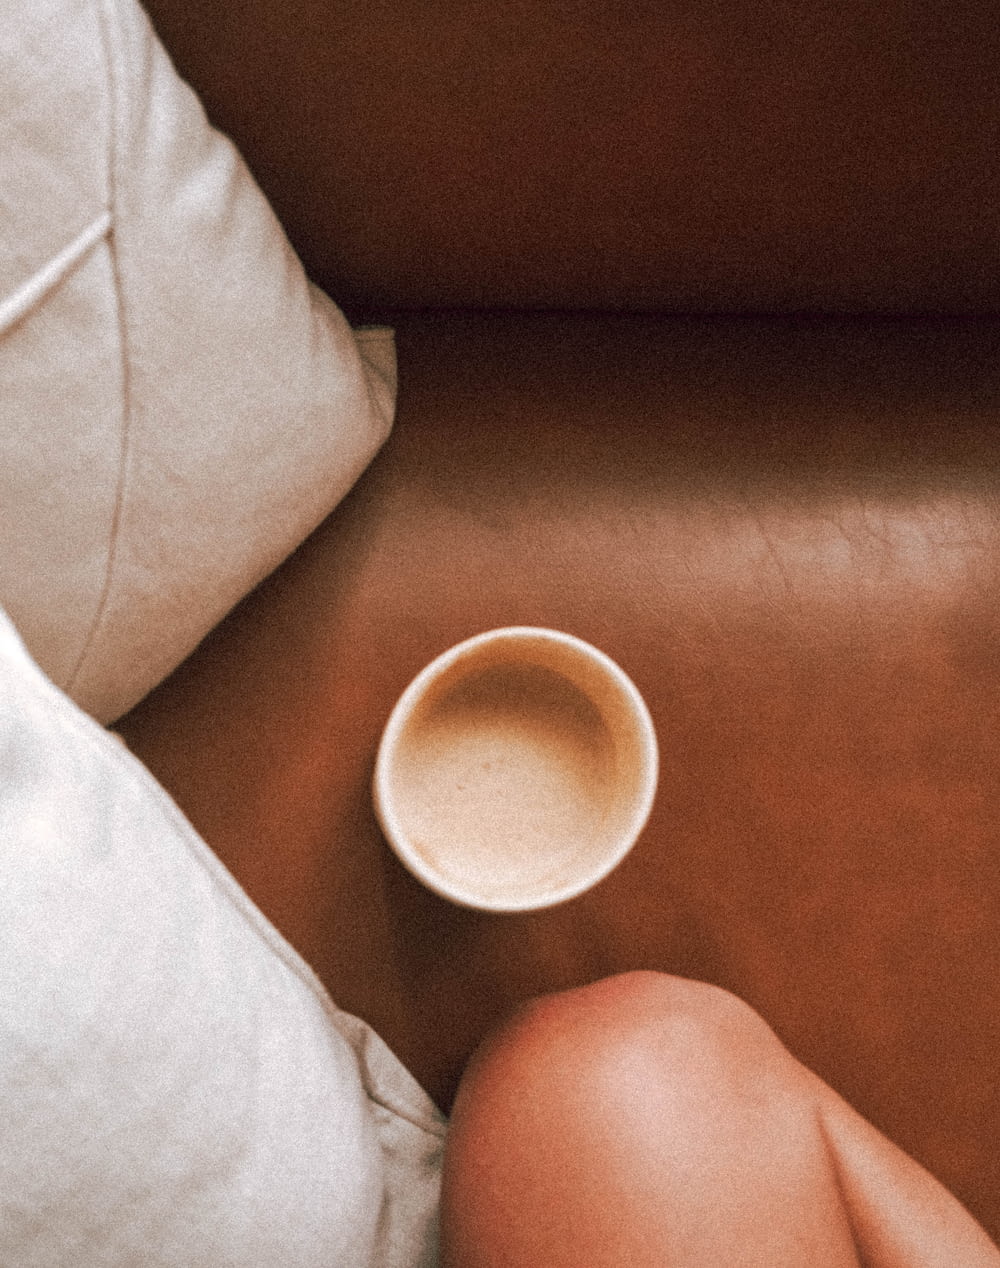 a woman sitting on a couch next to a cup of coffee